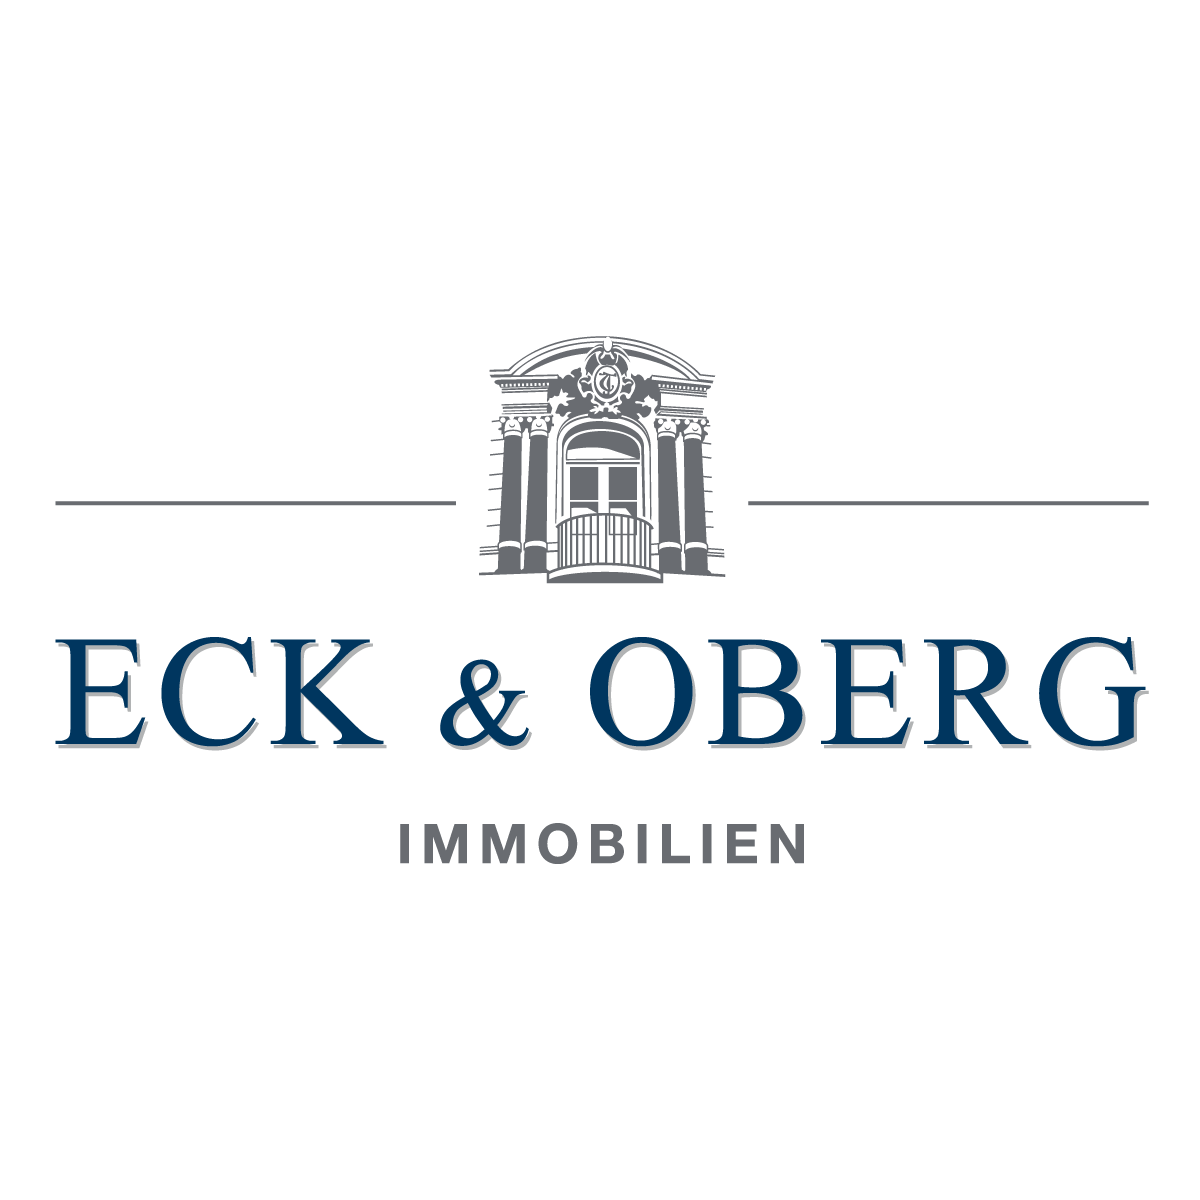 ECK & OBERG Immobilien GmbH